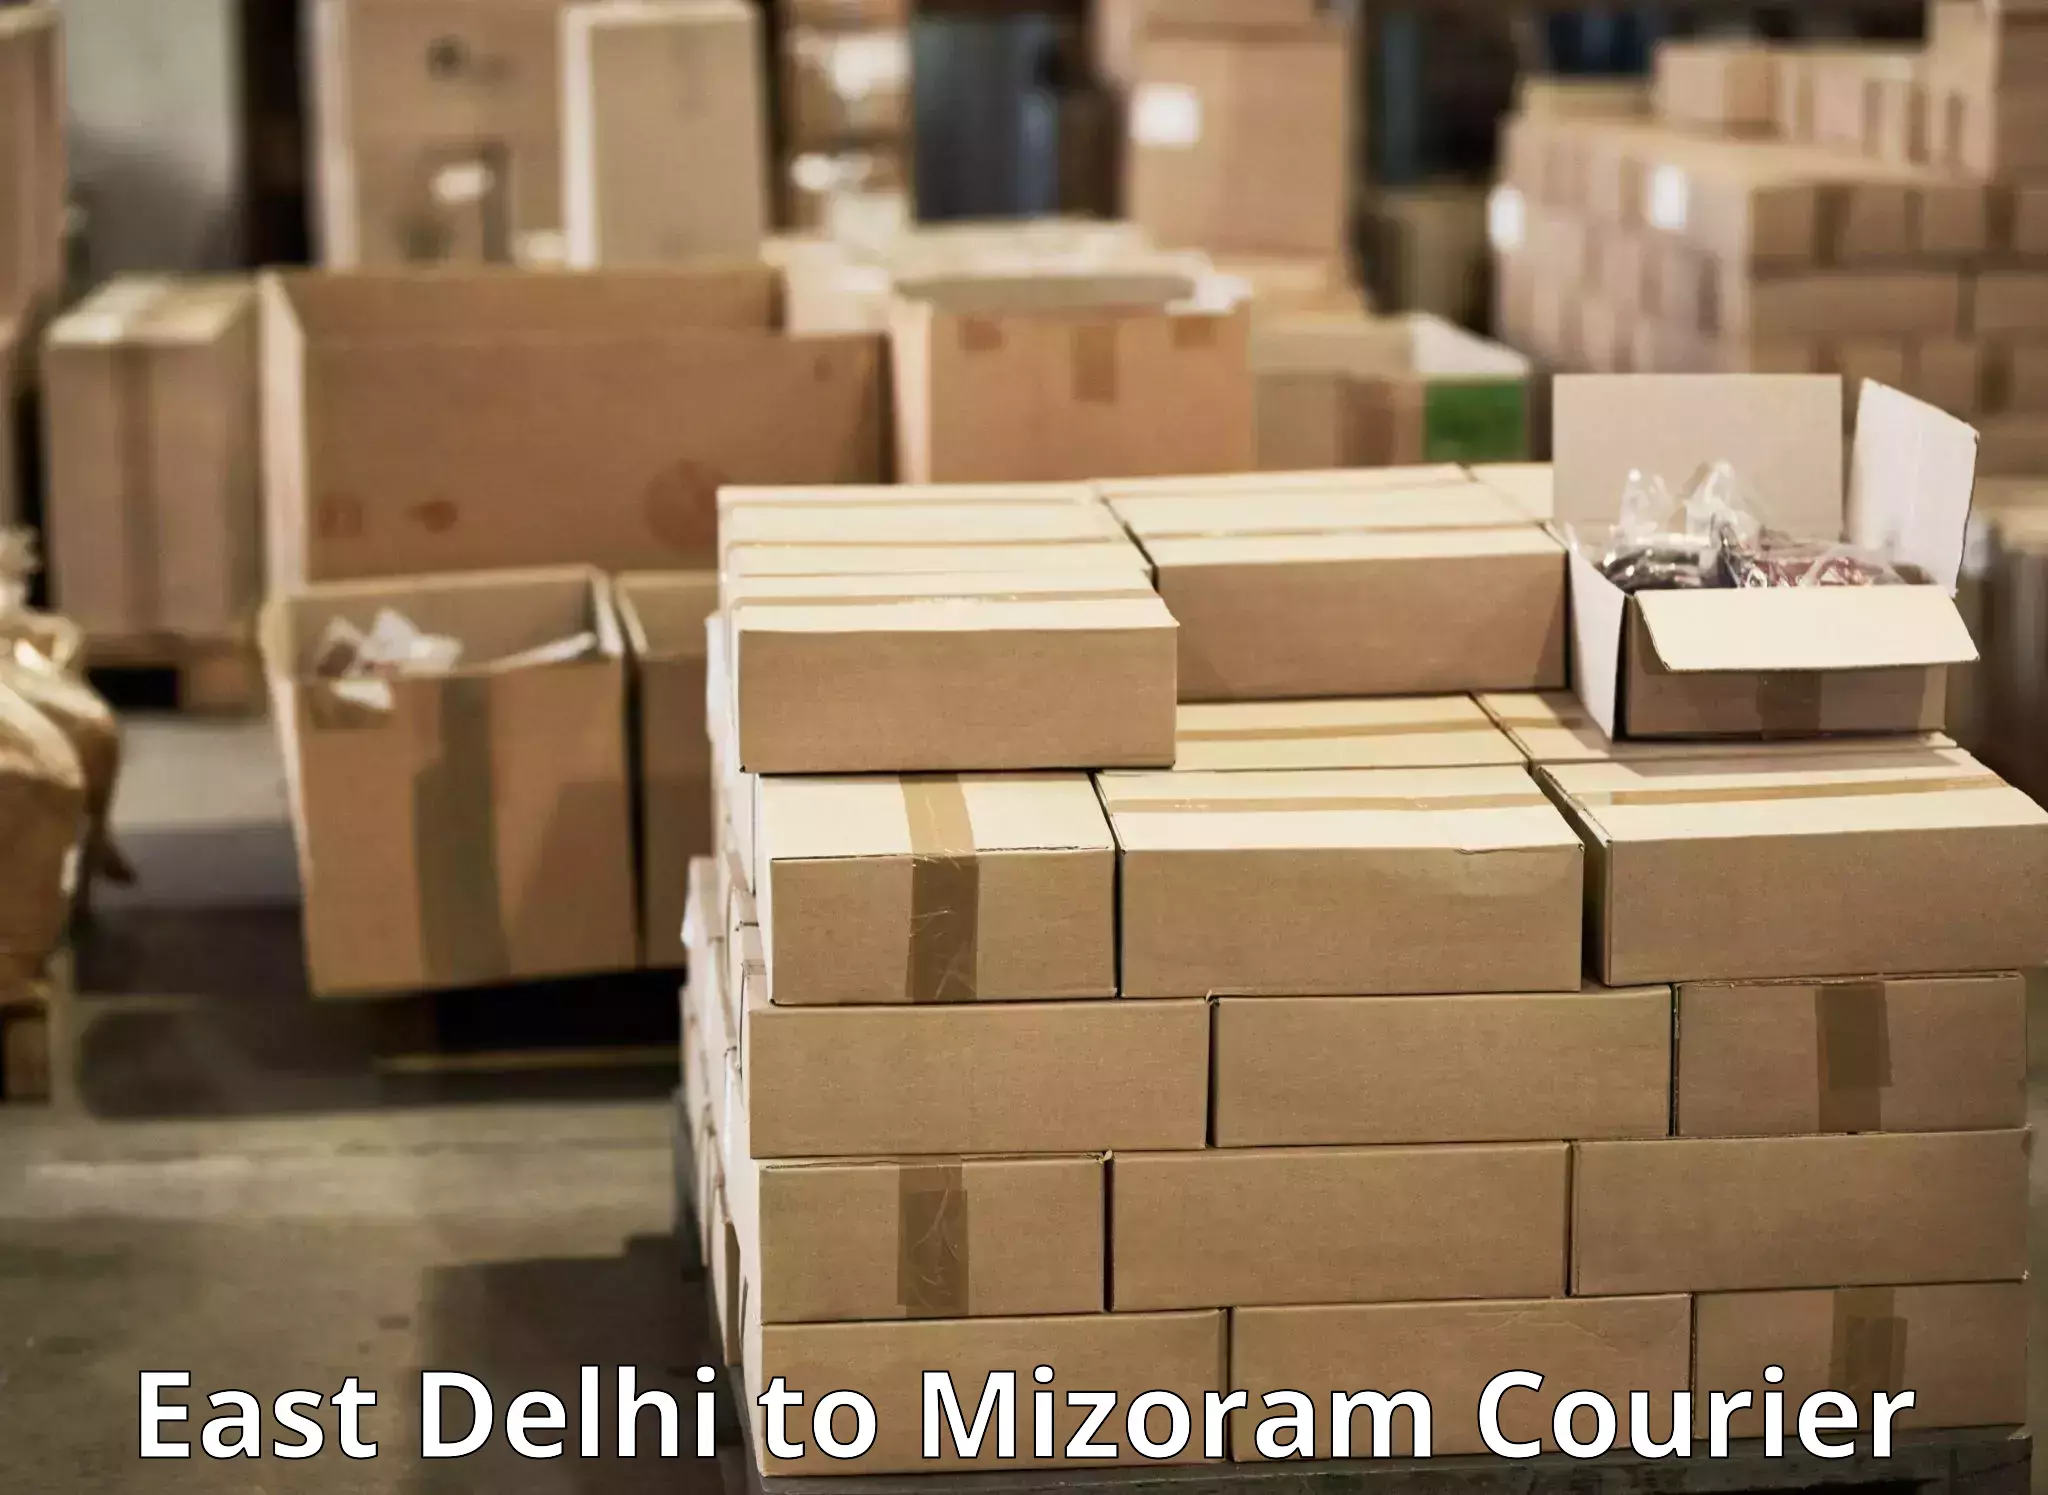 Package delivery network East Delhi to Mizoram